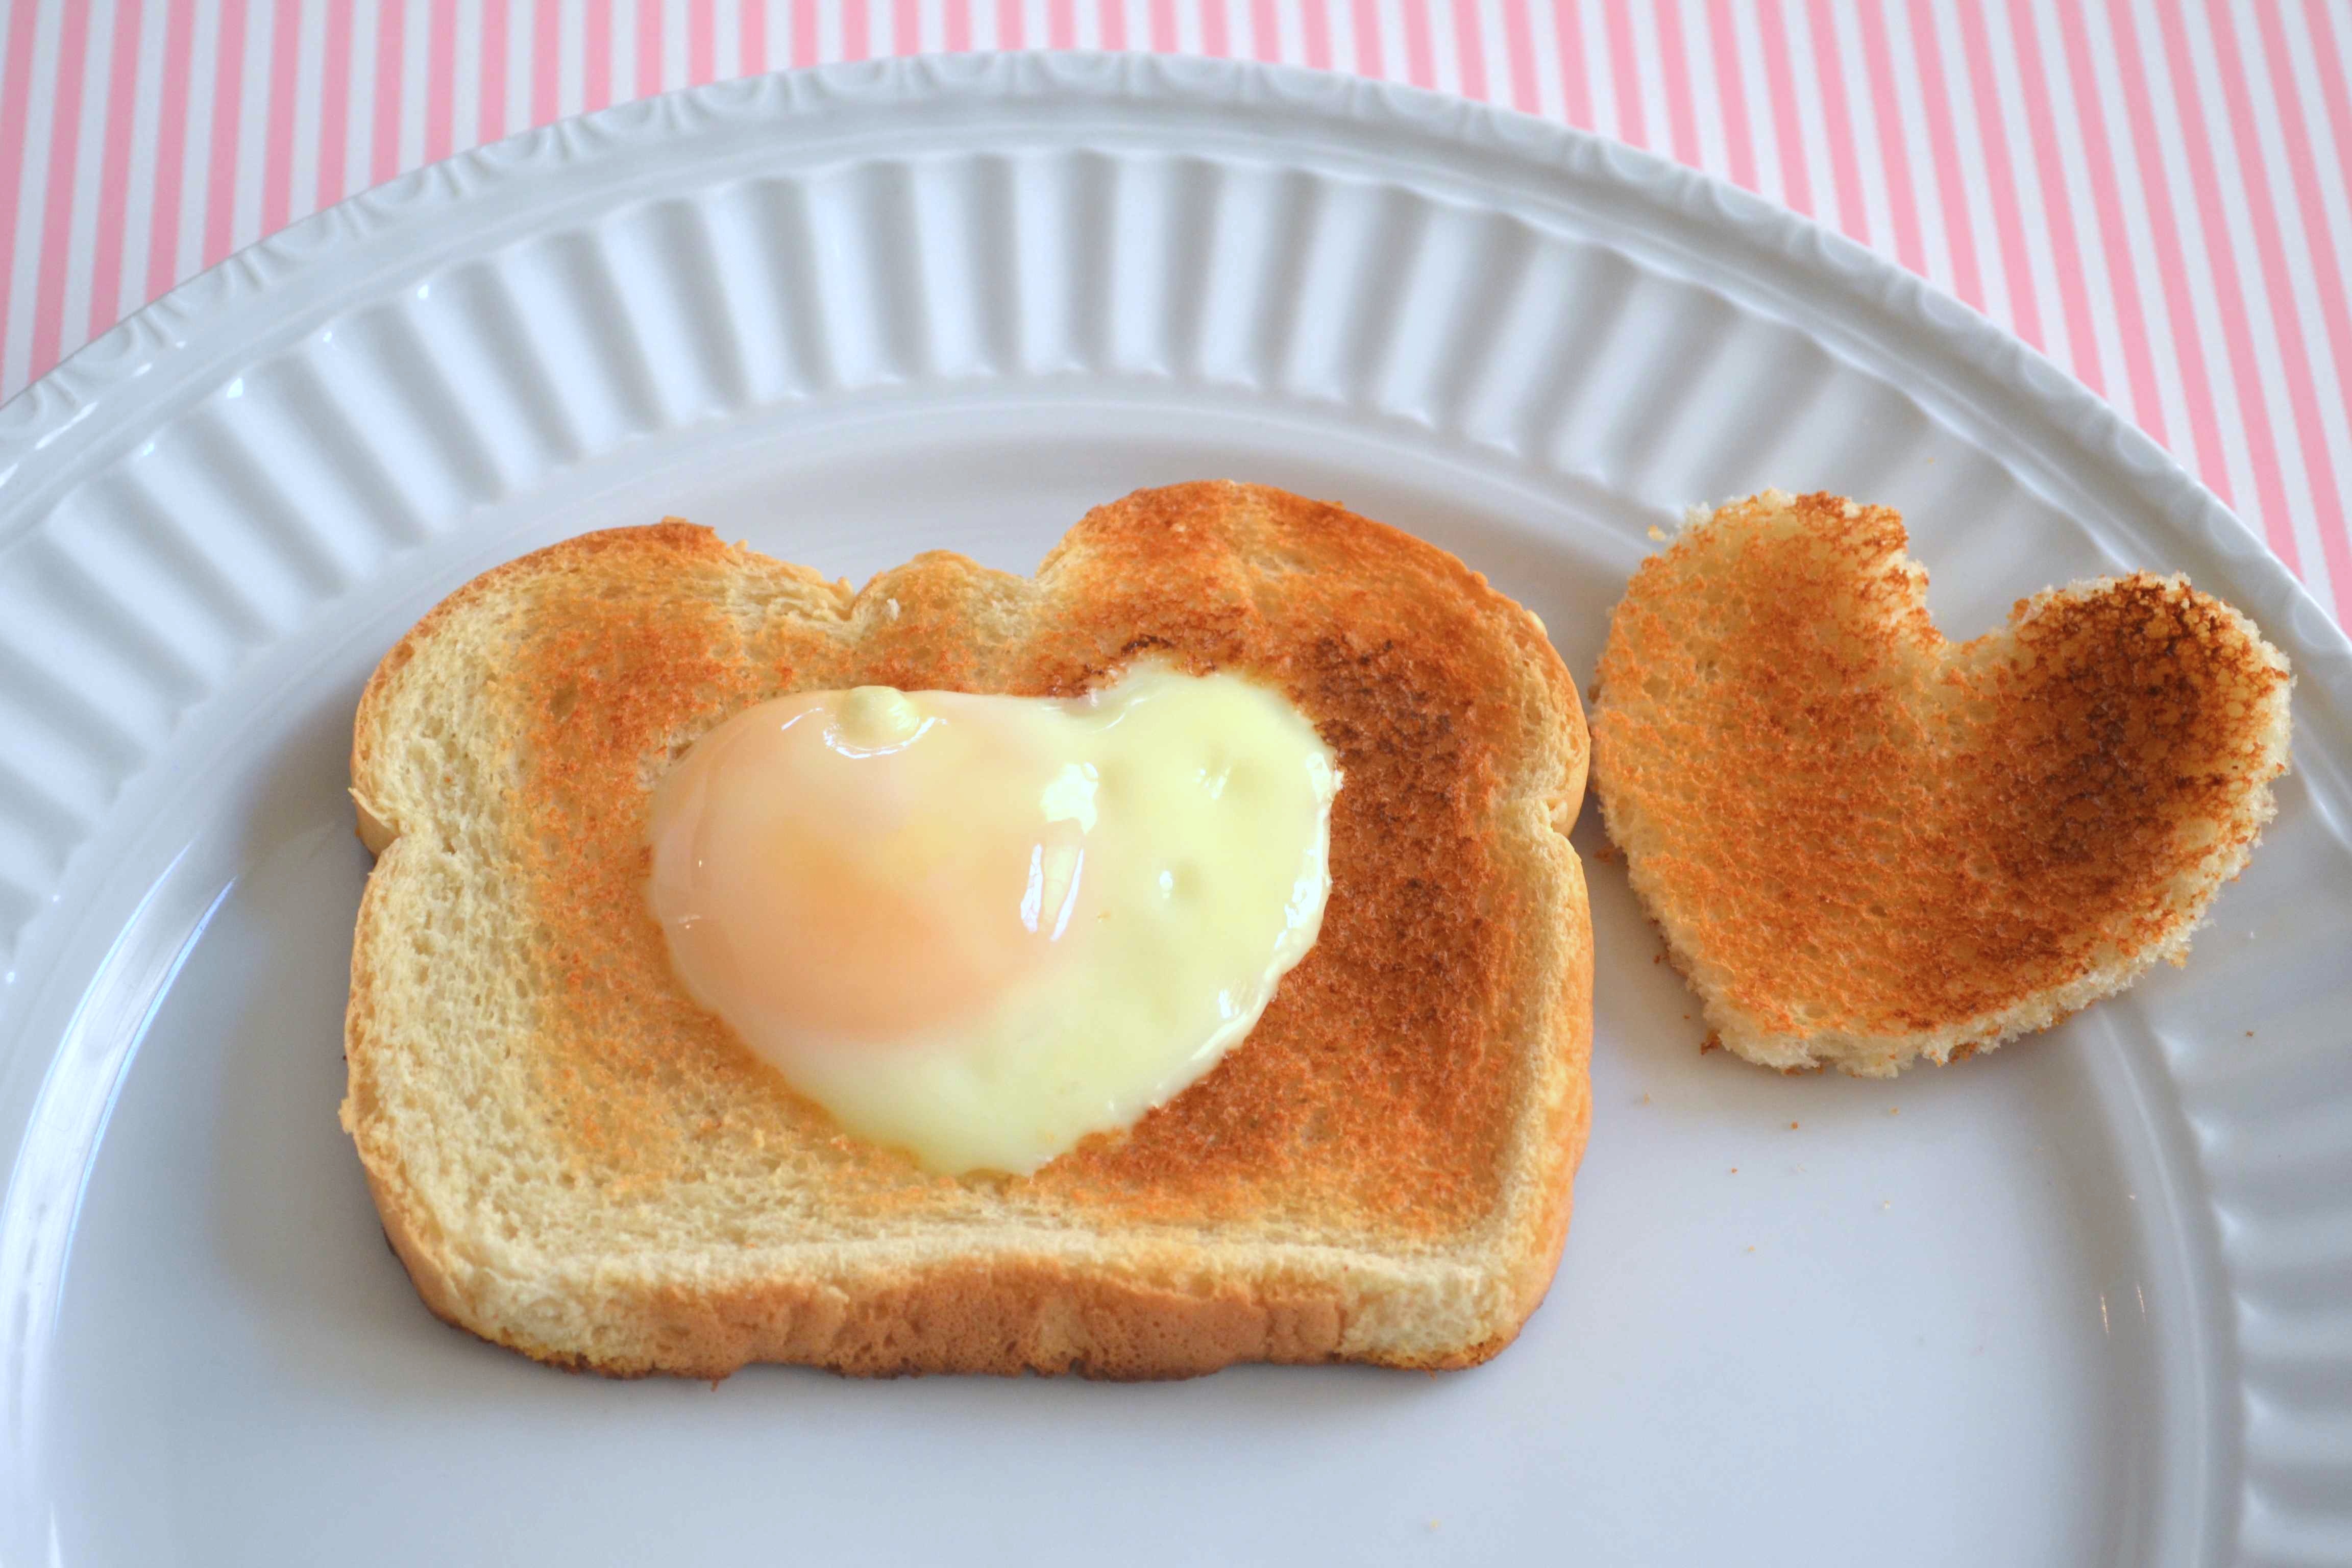 Sunny-Side Up Eggs in Toast - Measuring Cups, Optional